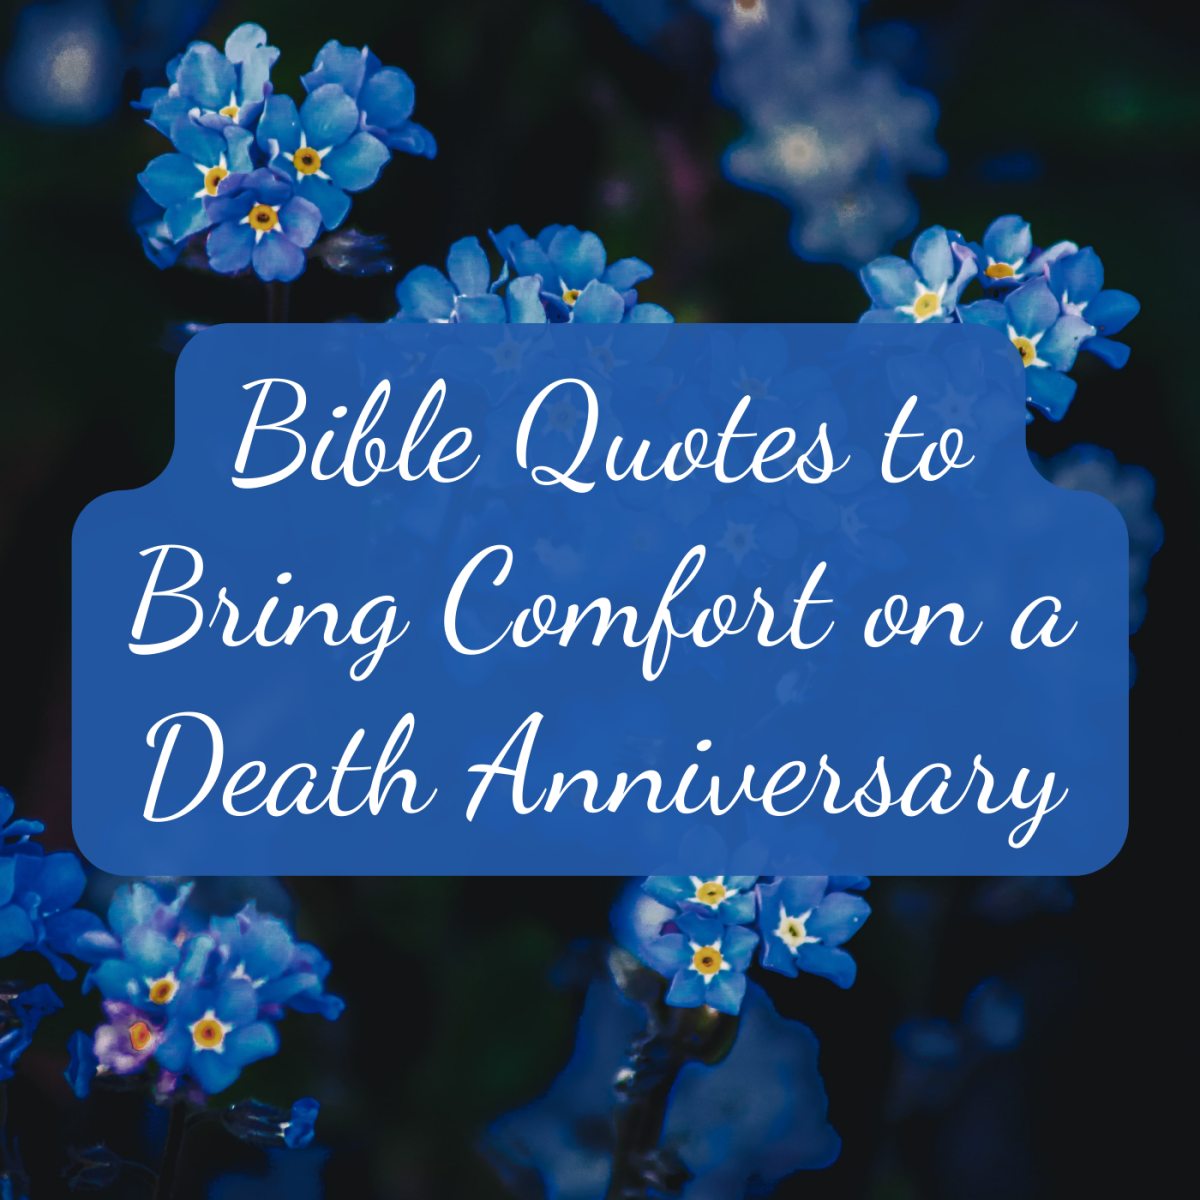 40 Bible Quotes for the Death Anniversary of a Loved One